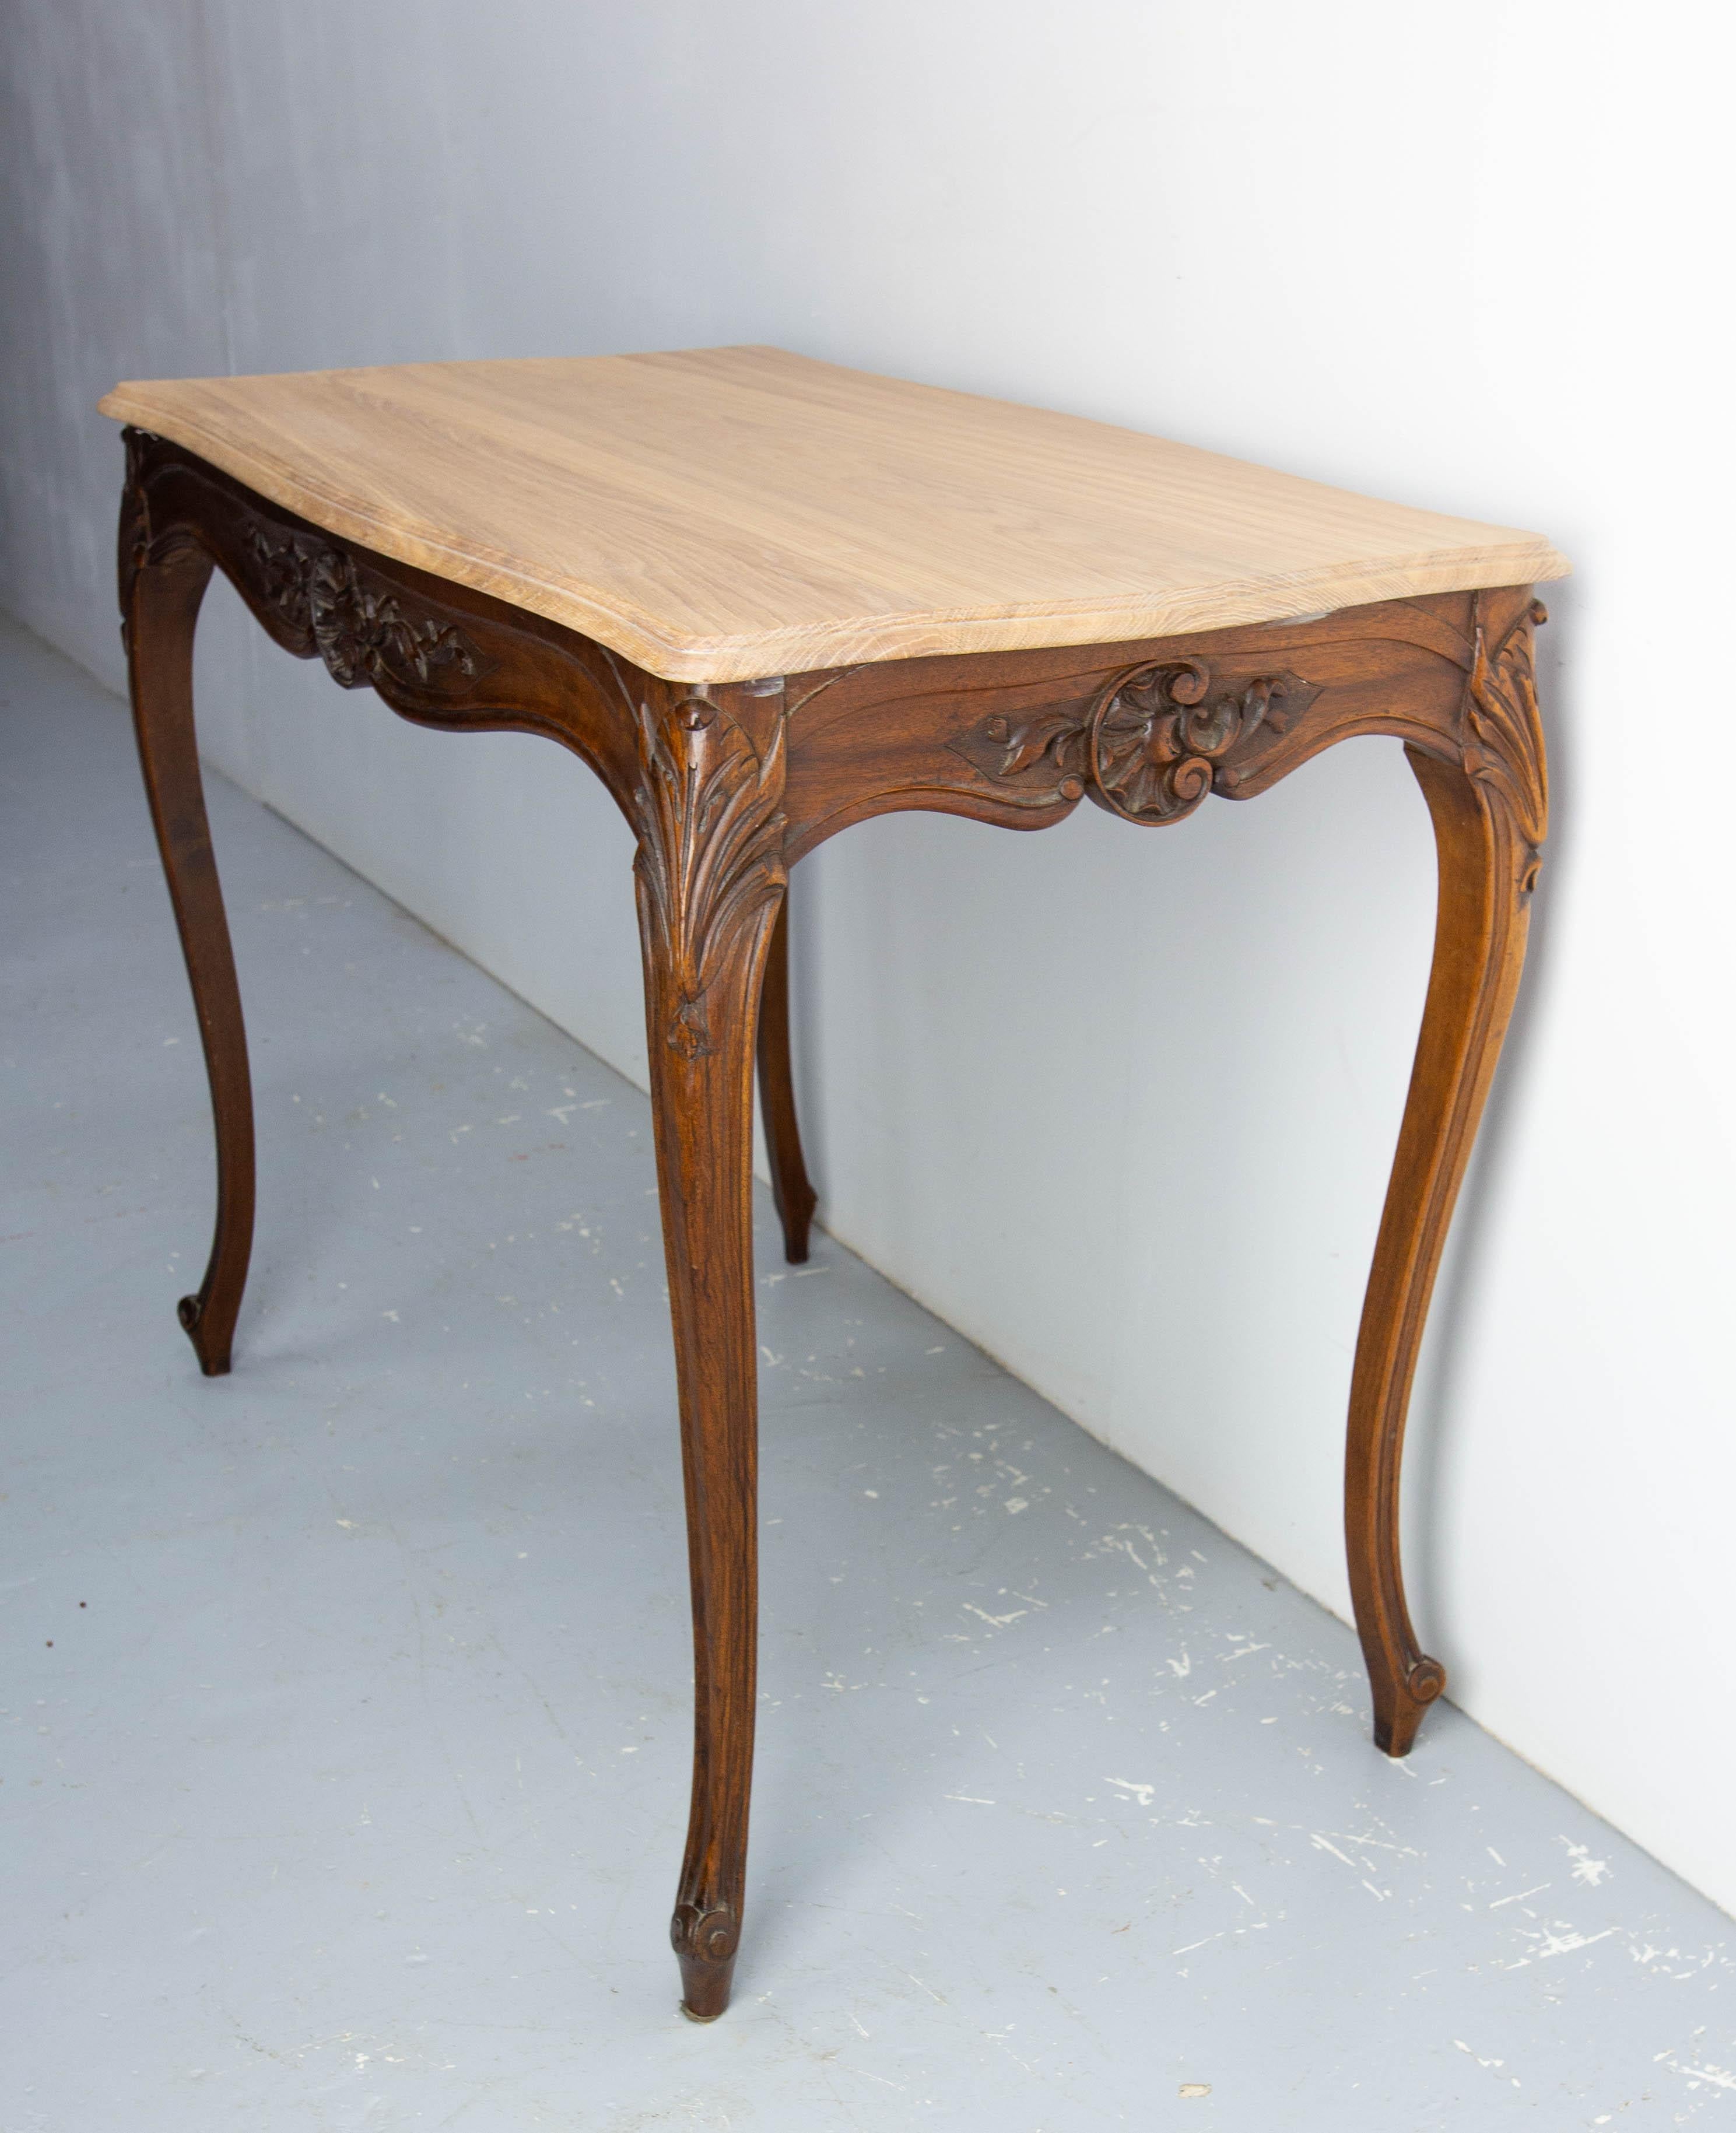 French Walnut & Oak Side Table in the Louis XV Style with Hiden Drawer, c. 1900 For Sale 1